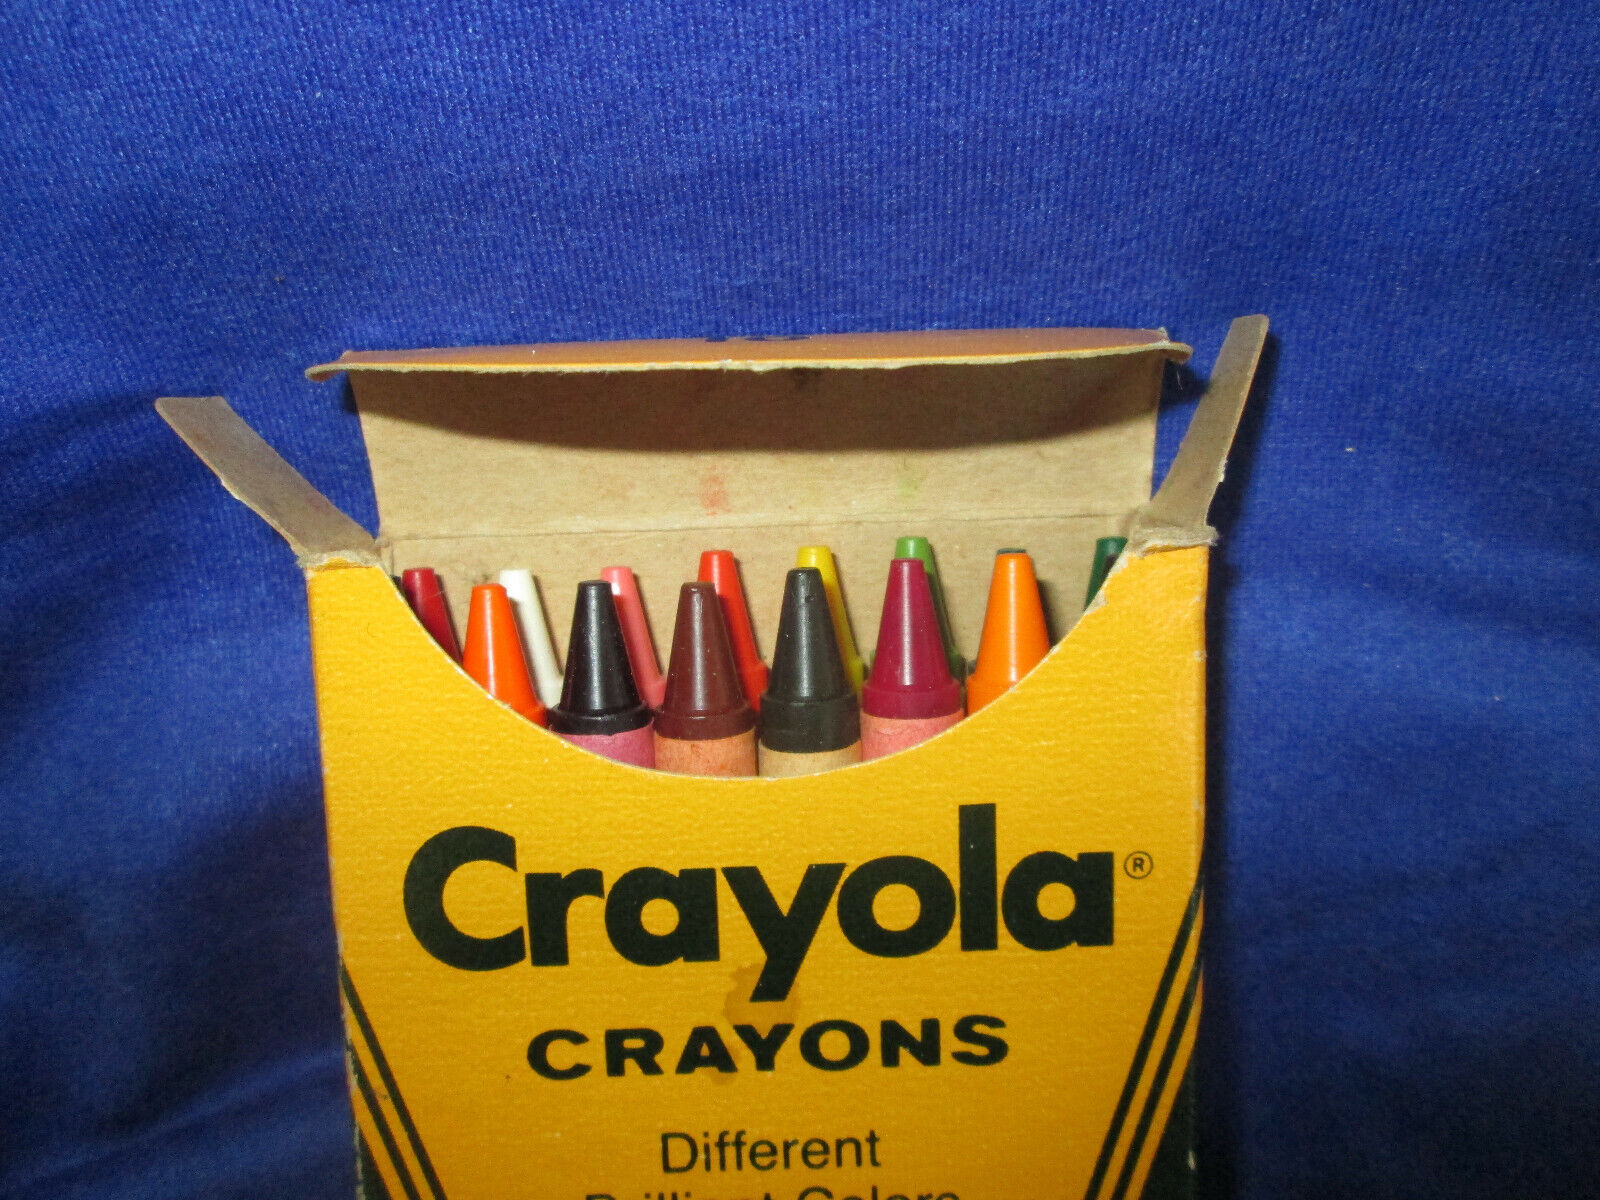 Vtg Crayola Crayon 16 Ct Box Binney & Smith THE REAL DEAL LIKE THEY USED TO BE